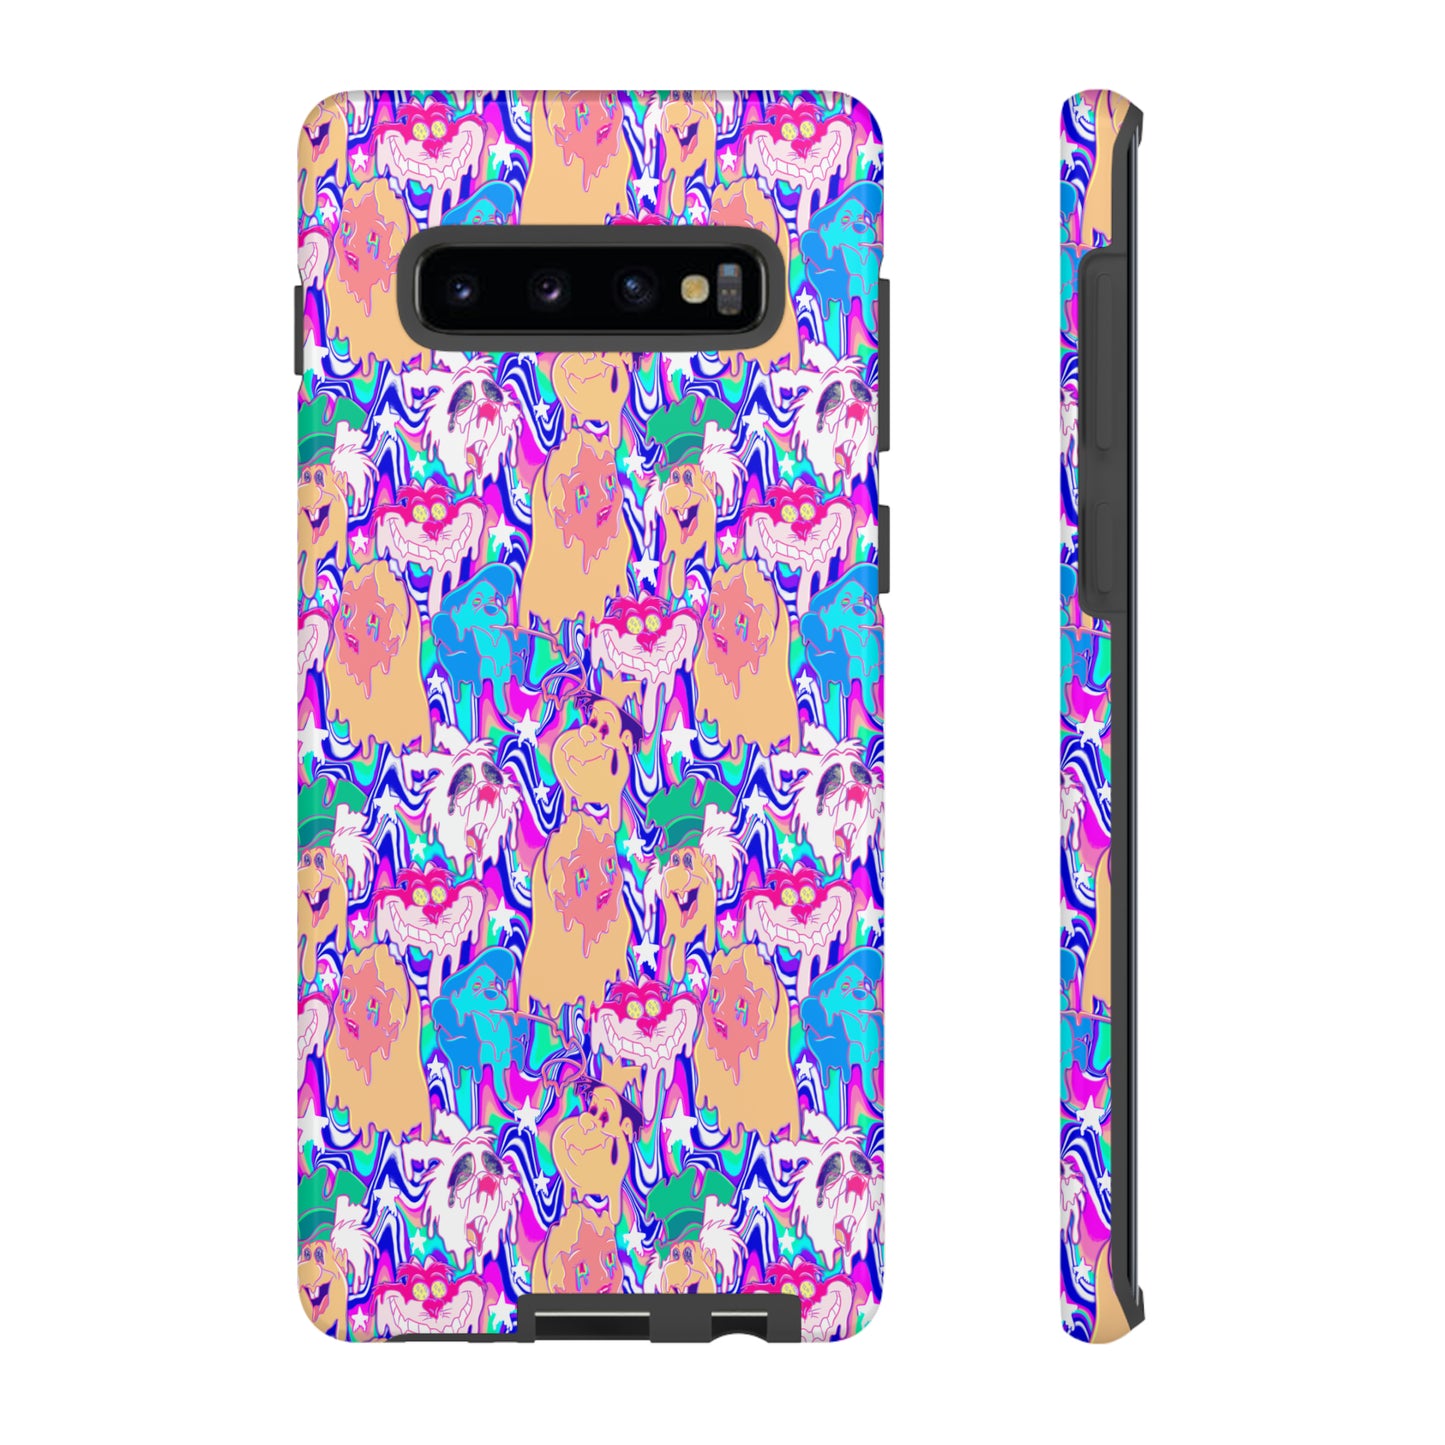 Tripy Tough Phone Case for Iphones, Samsungs, and Google phones